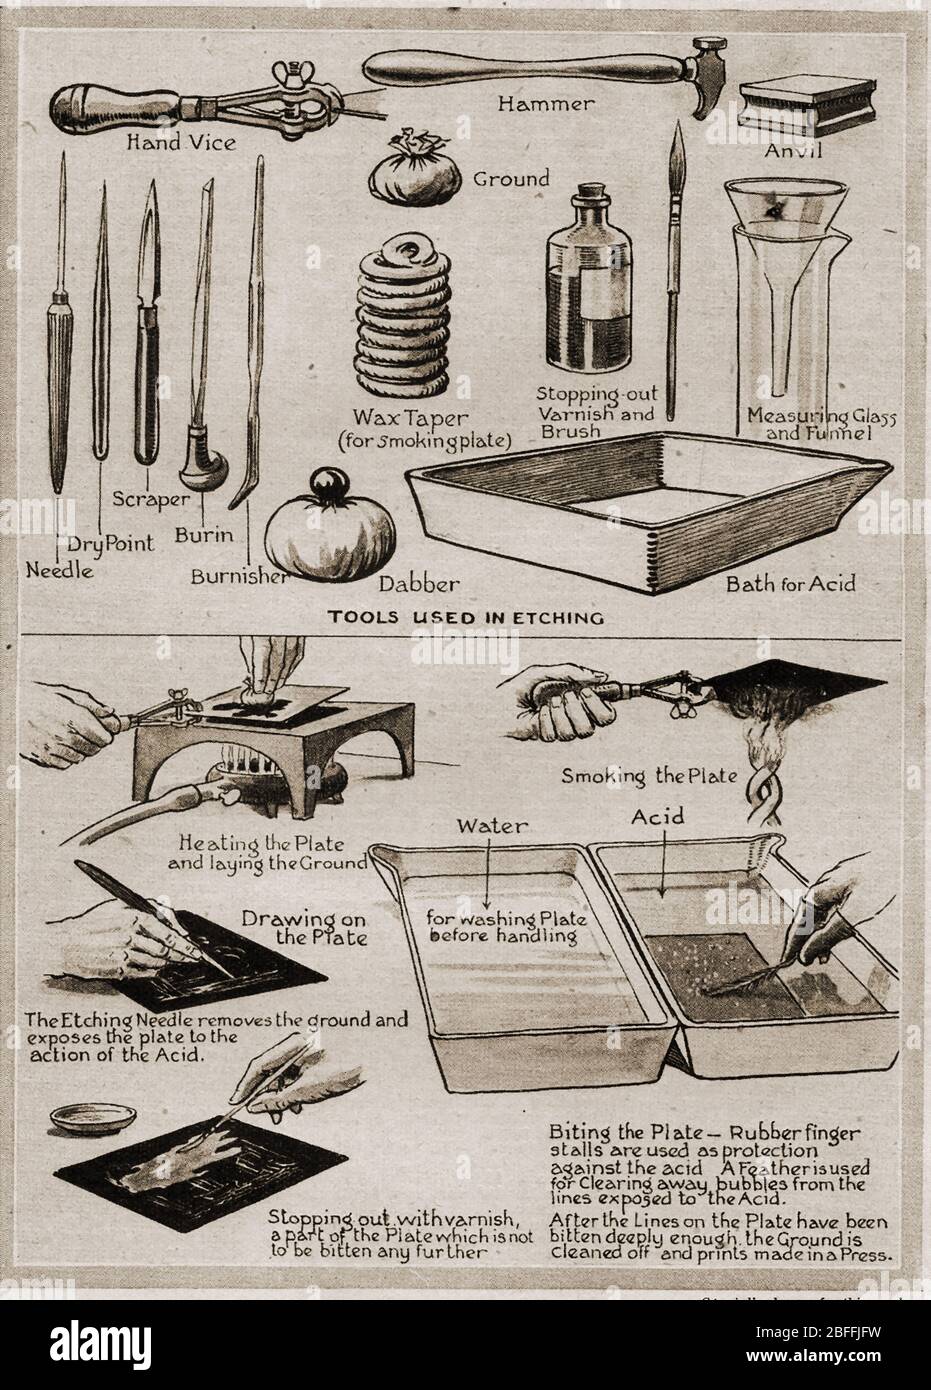 1940's illustration - tools and methods used when etching by hand. Etching is traditionally the process of using strong acid or mordant to cut into  unprotected parts of a metal surface and to etch or create an incised design. Stock Photo